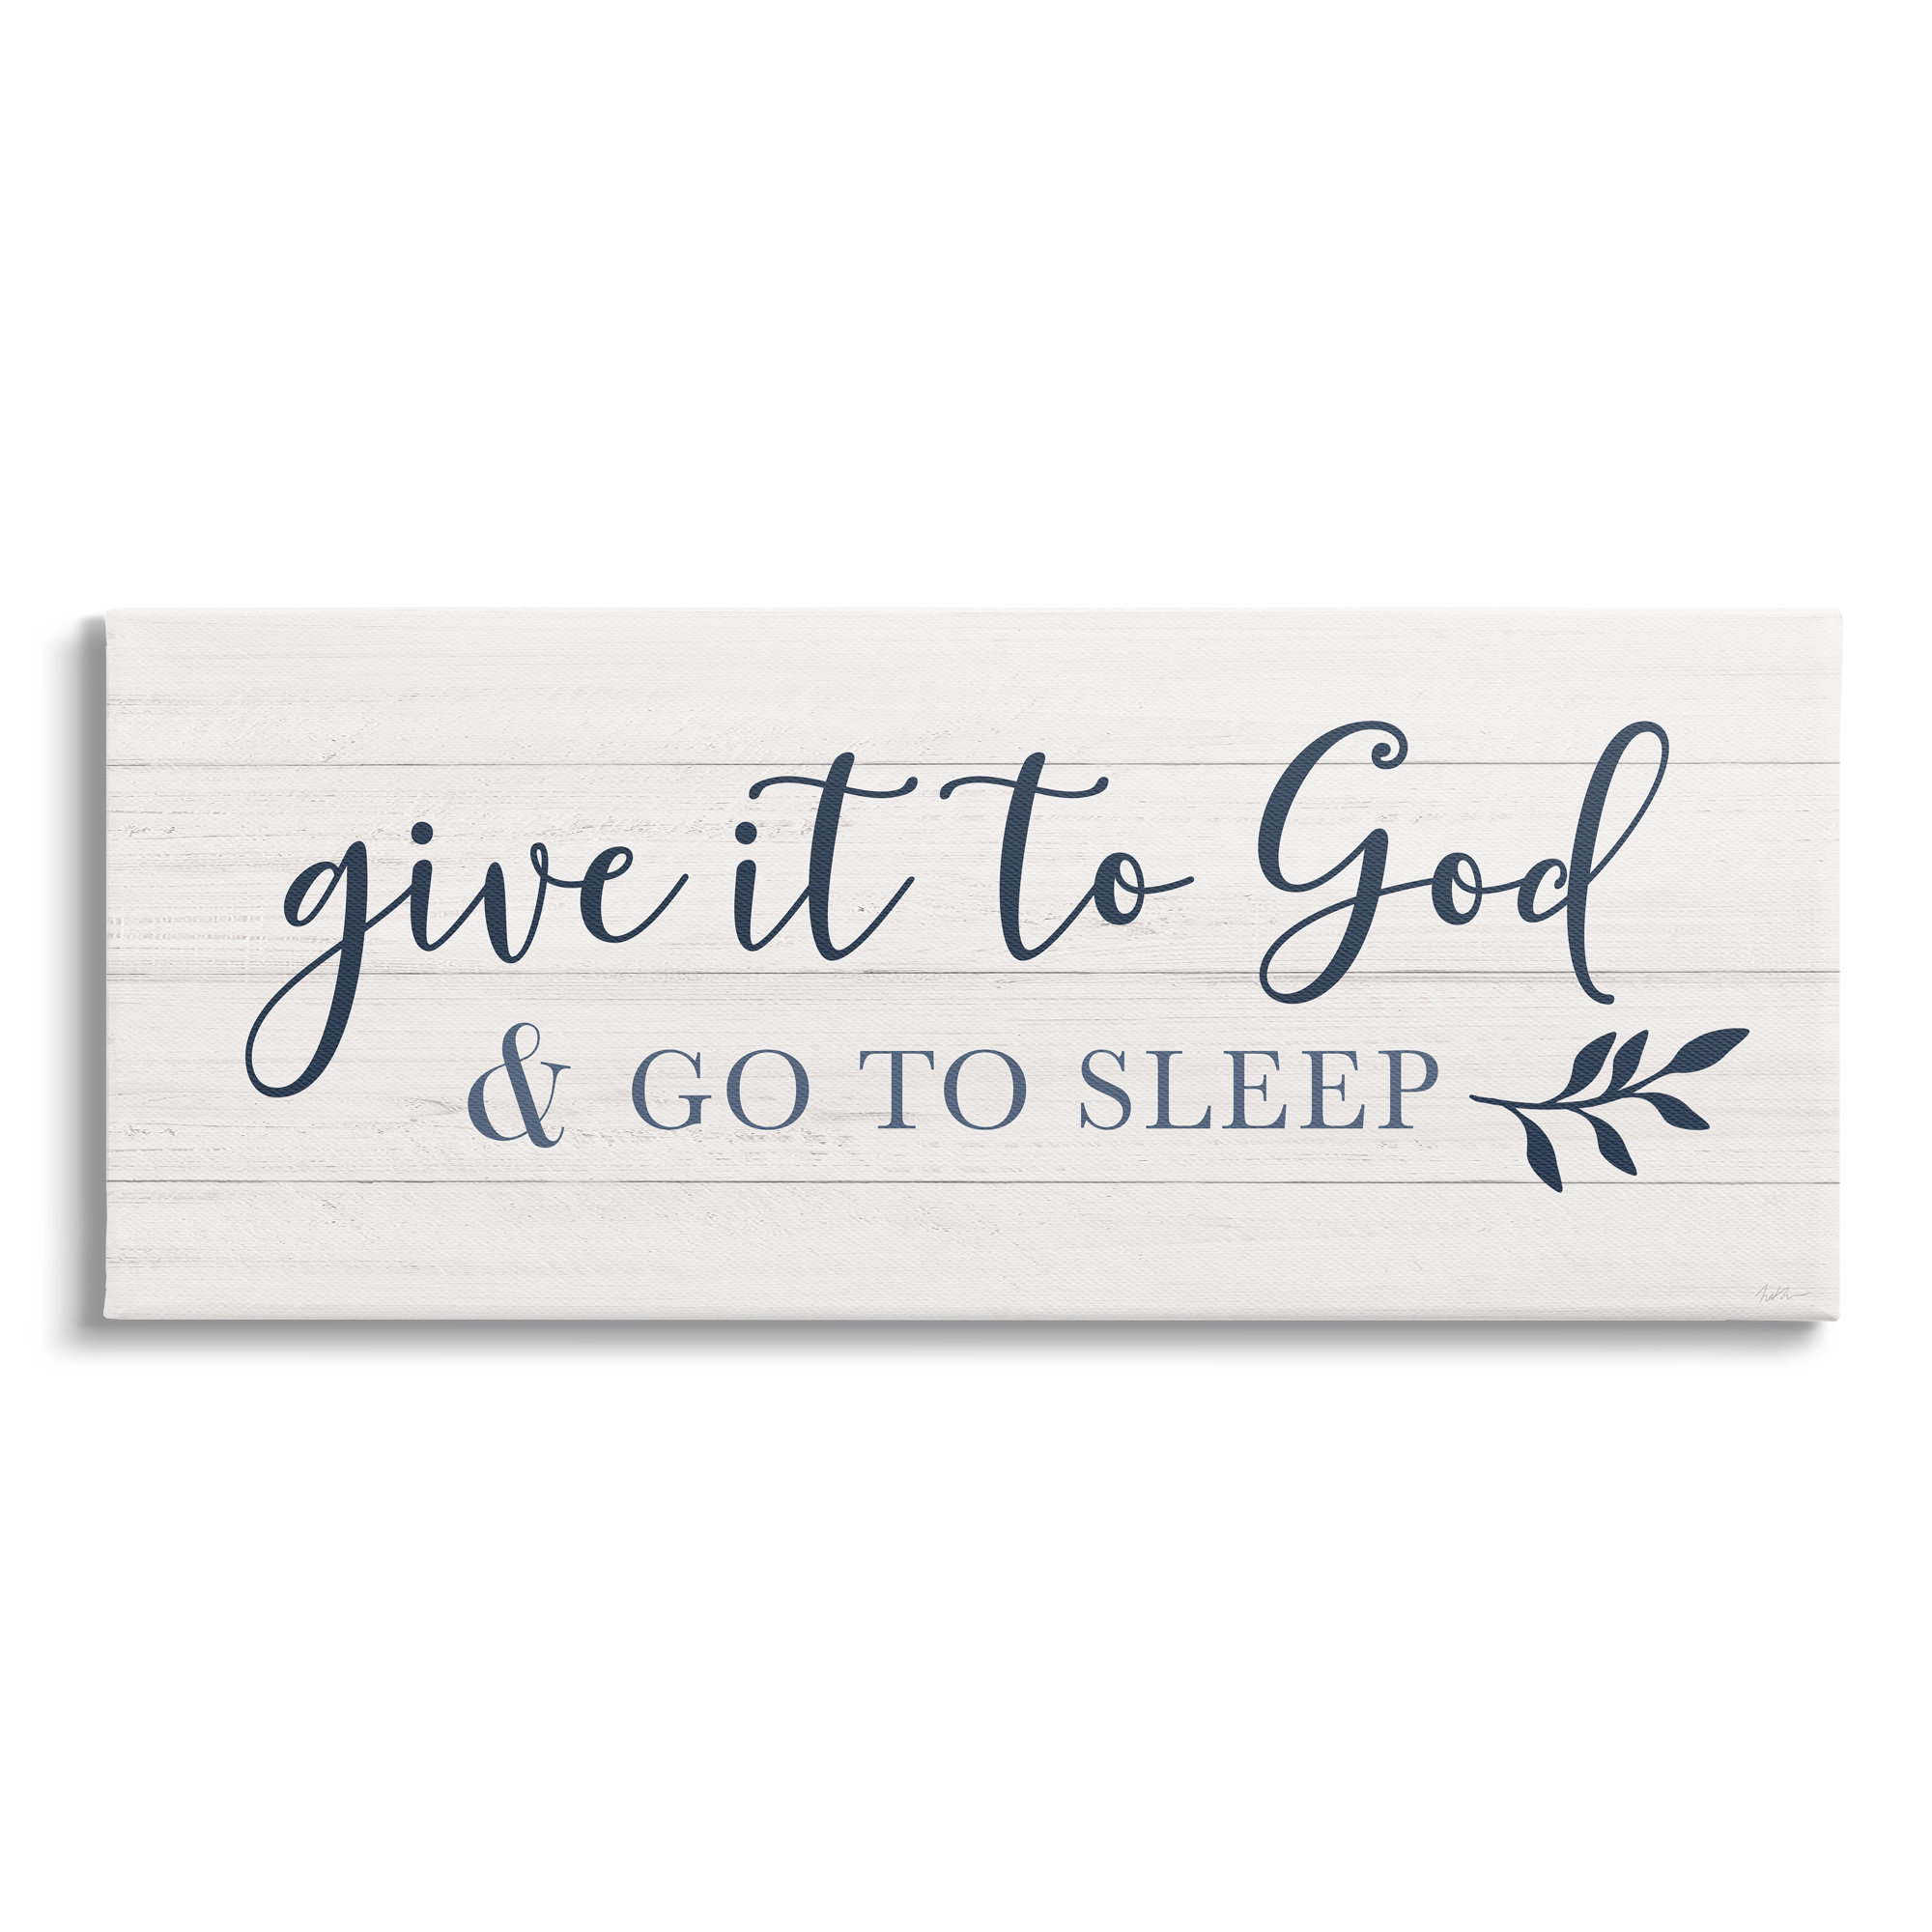 Give It To God And Go To Sleep, decorative pillows for bed, throw